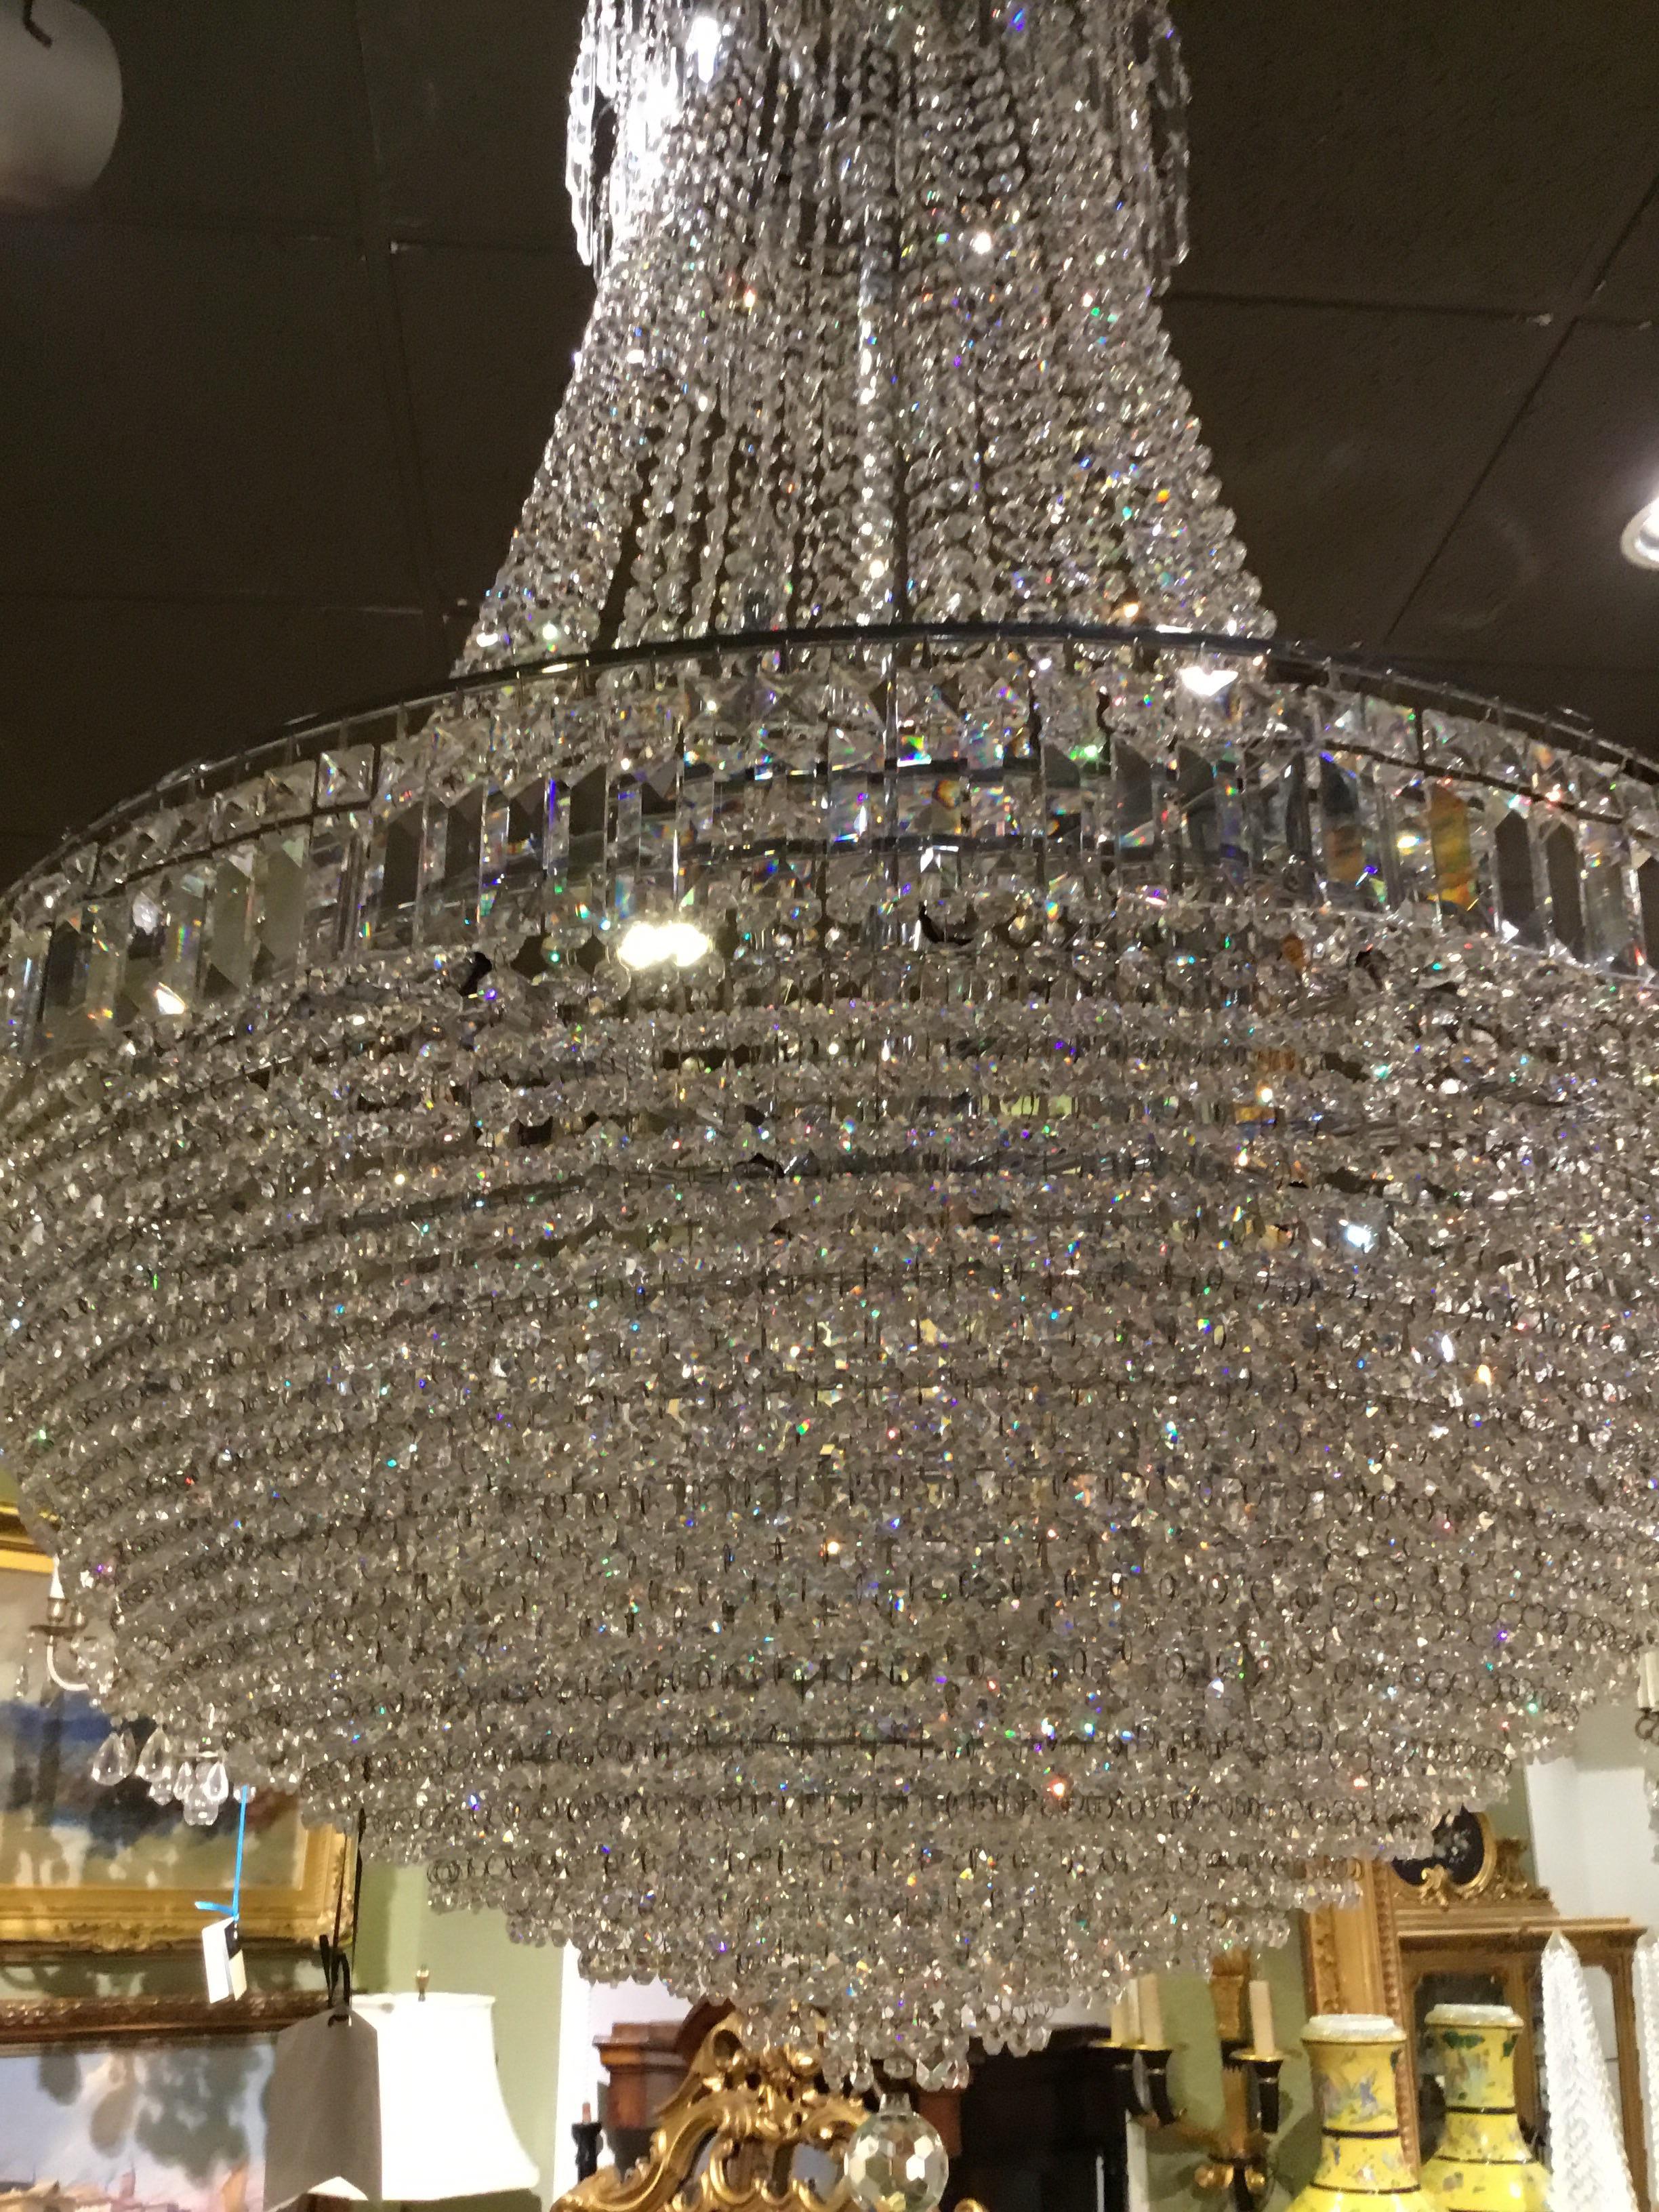 Straus crystal chandelier with very large spray of lights 
Which reflects great color.